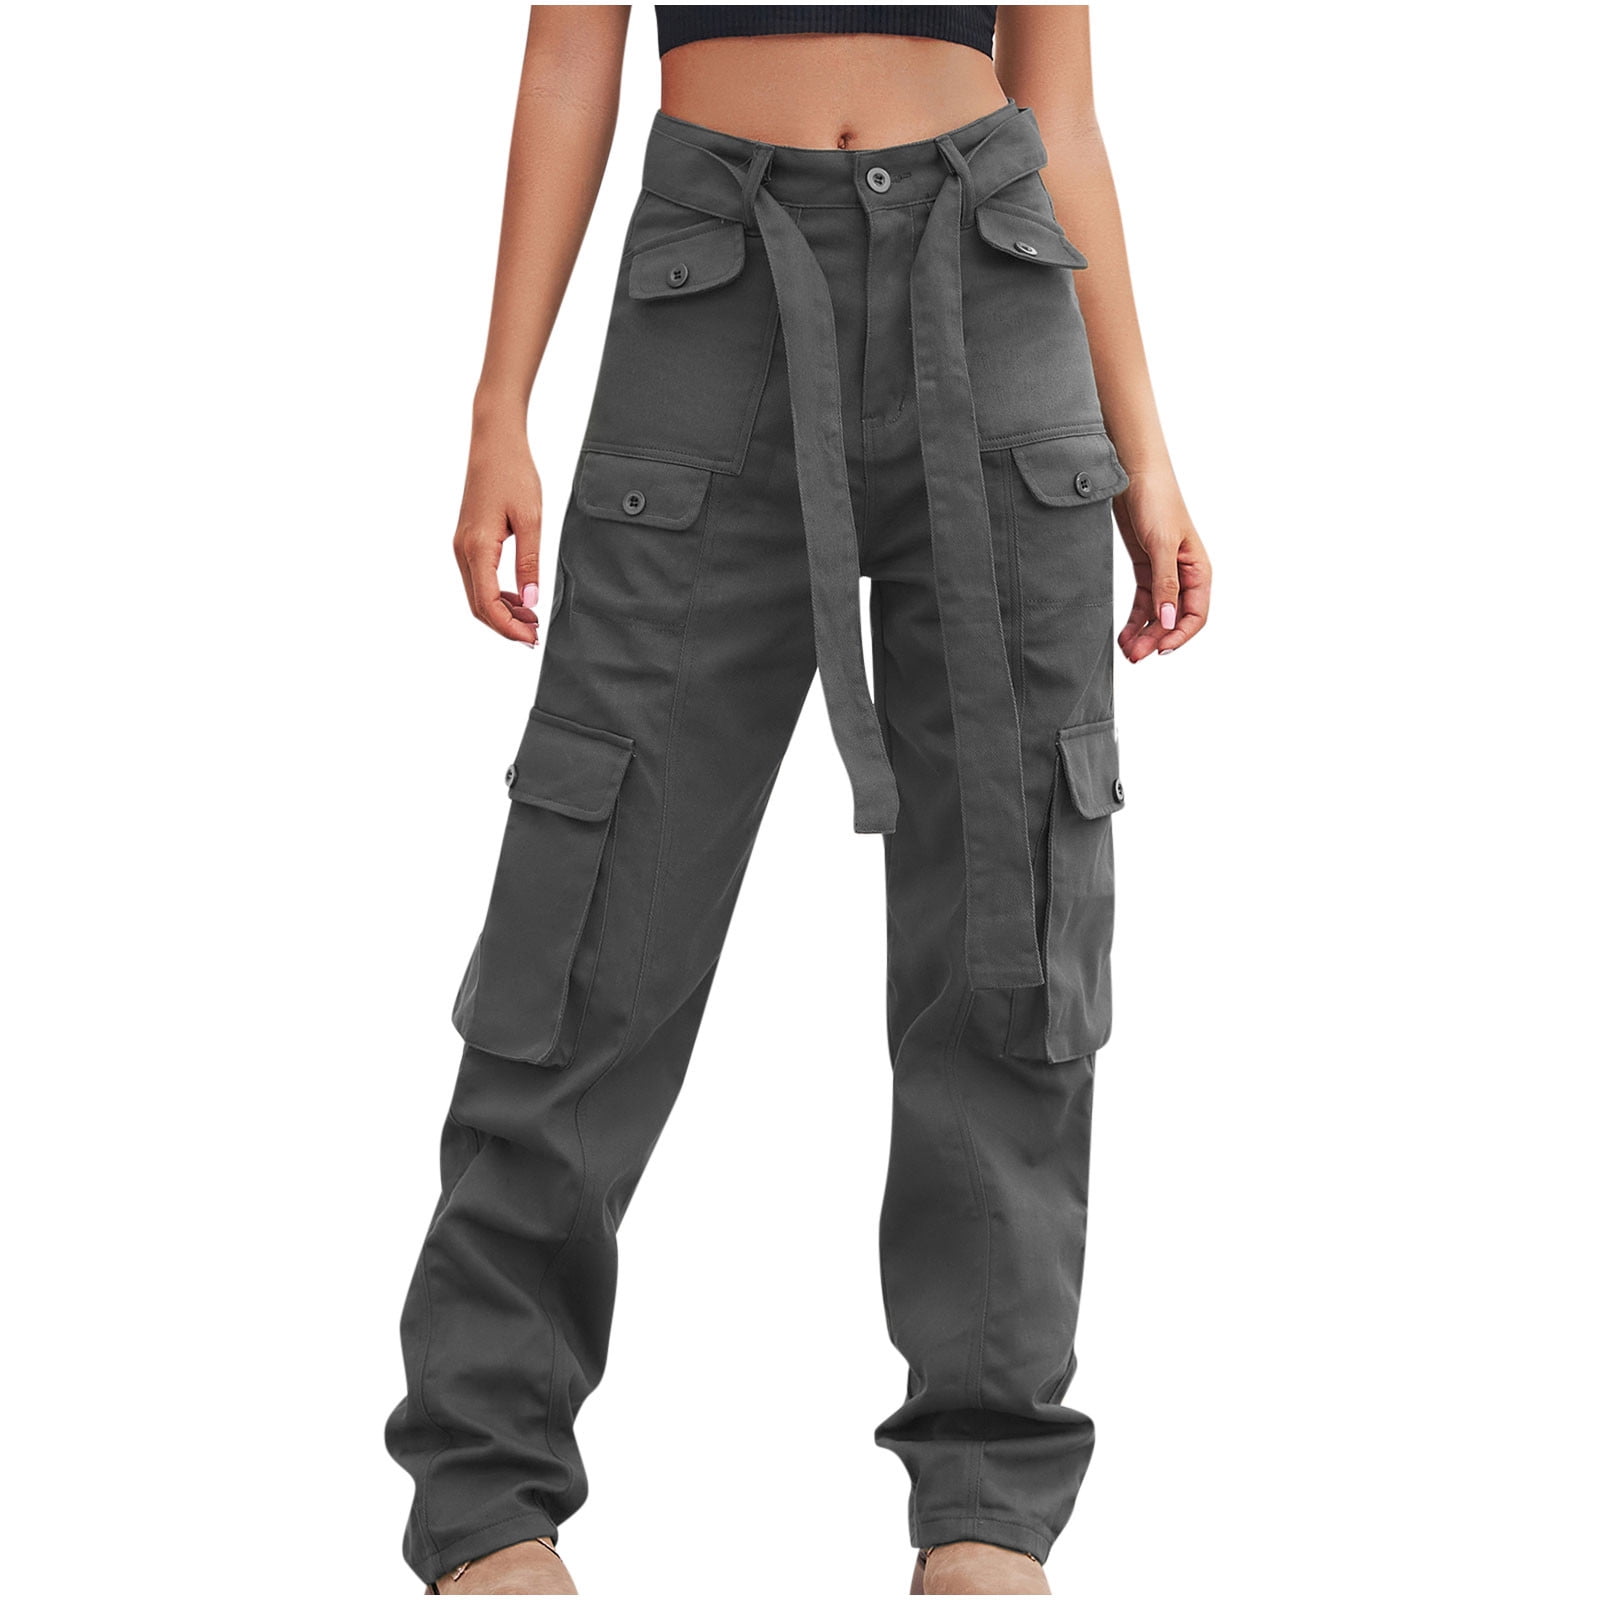 RQYYD Cargo Pants Women Casual Loose High Waisted Straight Leg Baggy Pants  Trousers Lightweight Outdoor Travel Pants with Pockets(Army Green,XL) 